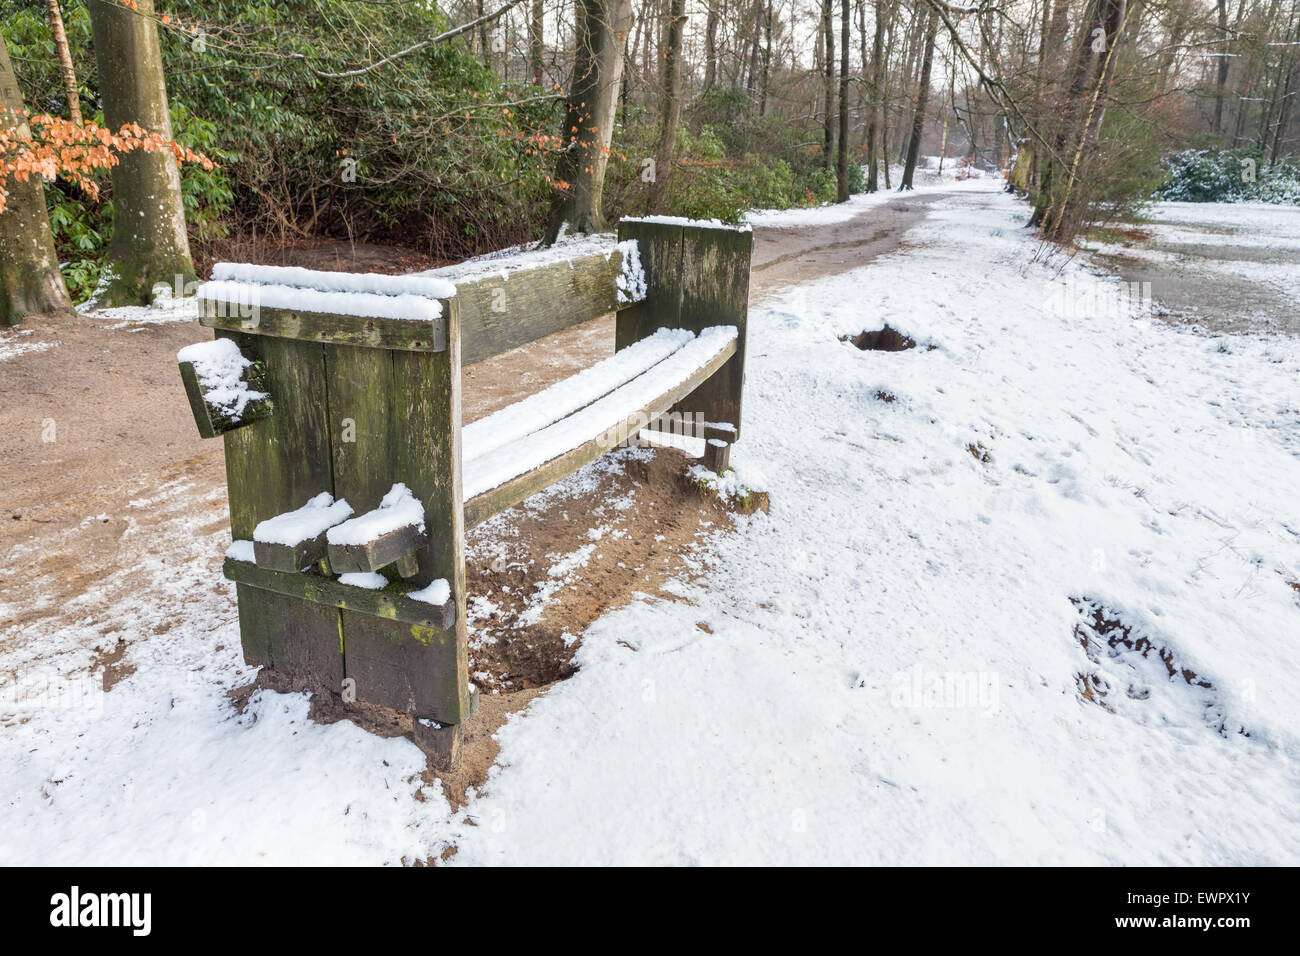 Wooden bench in forest along footpath with snow in winter season Stock Photo